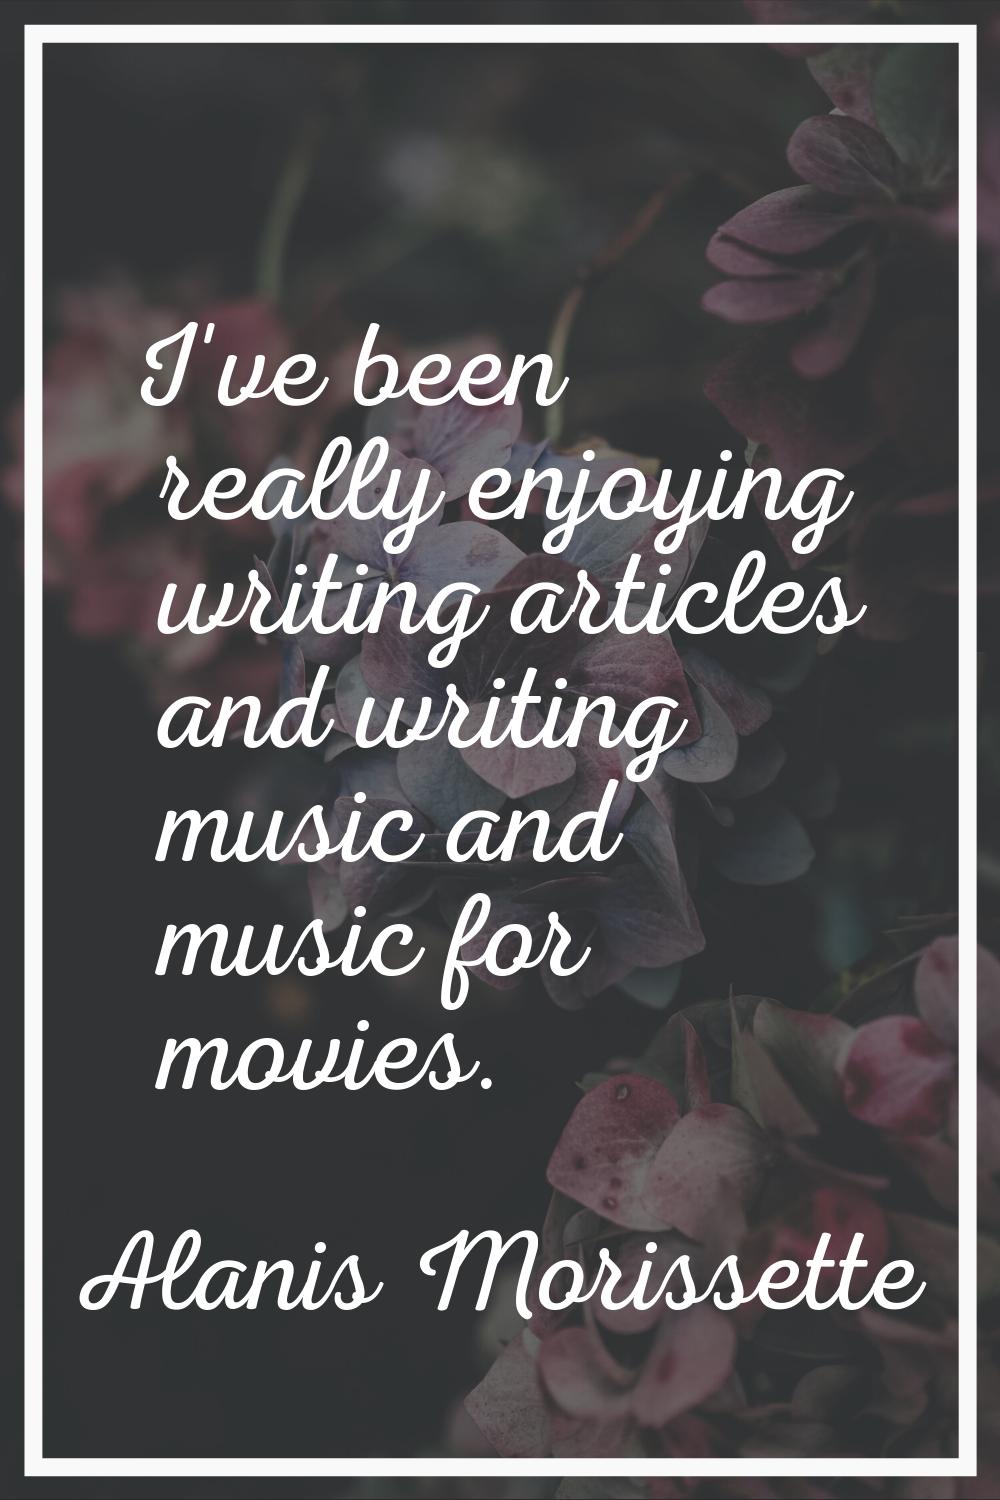 I've been really enjoying writing articles and writing music and music for movies.